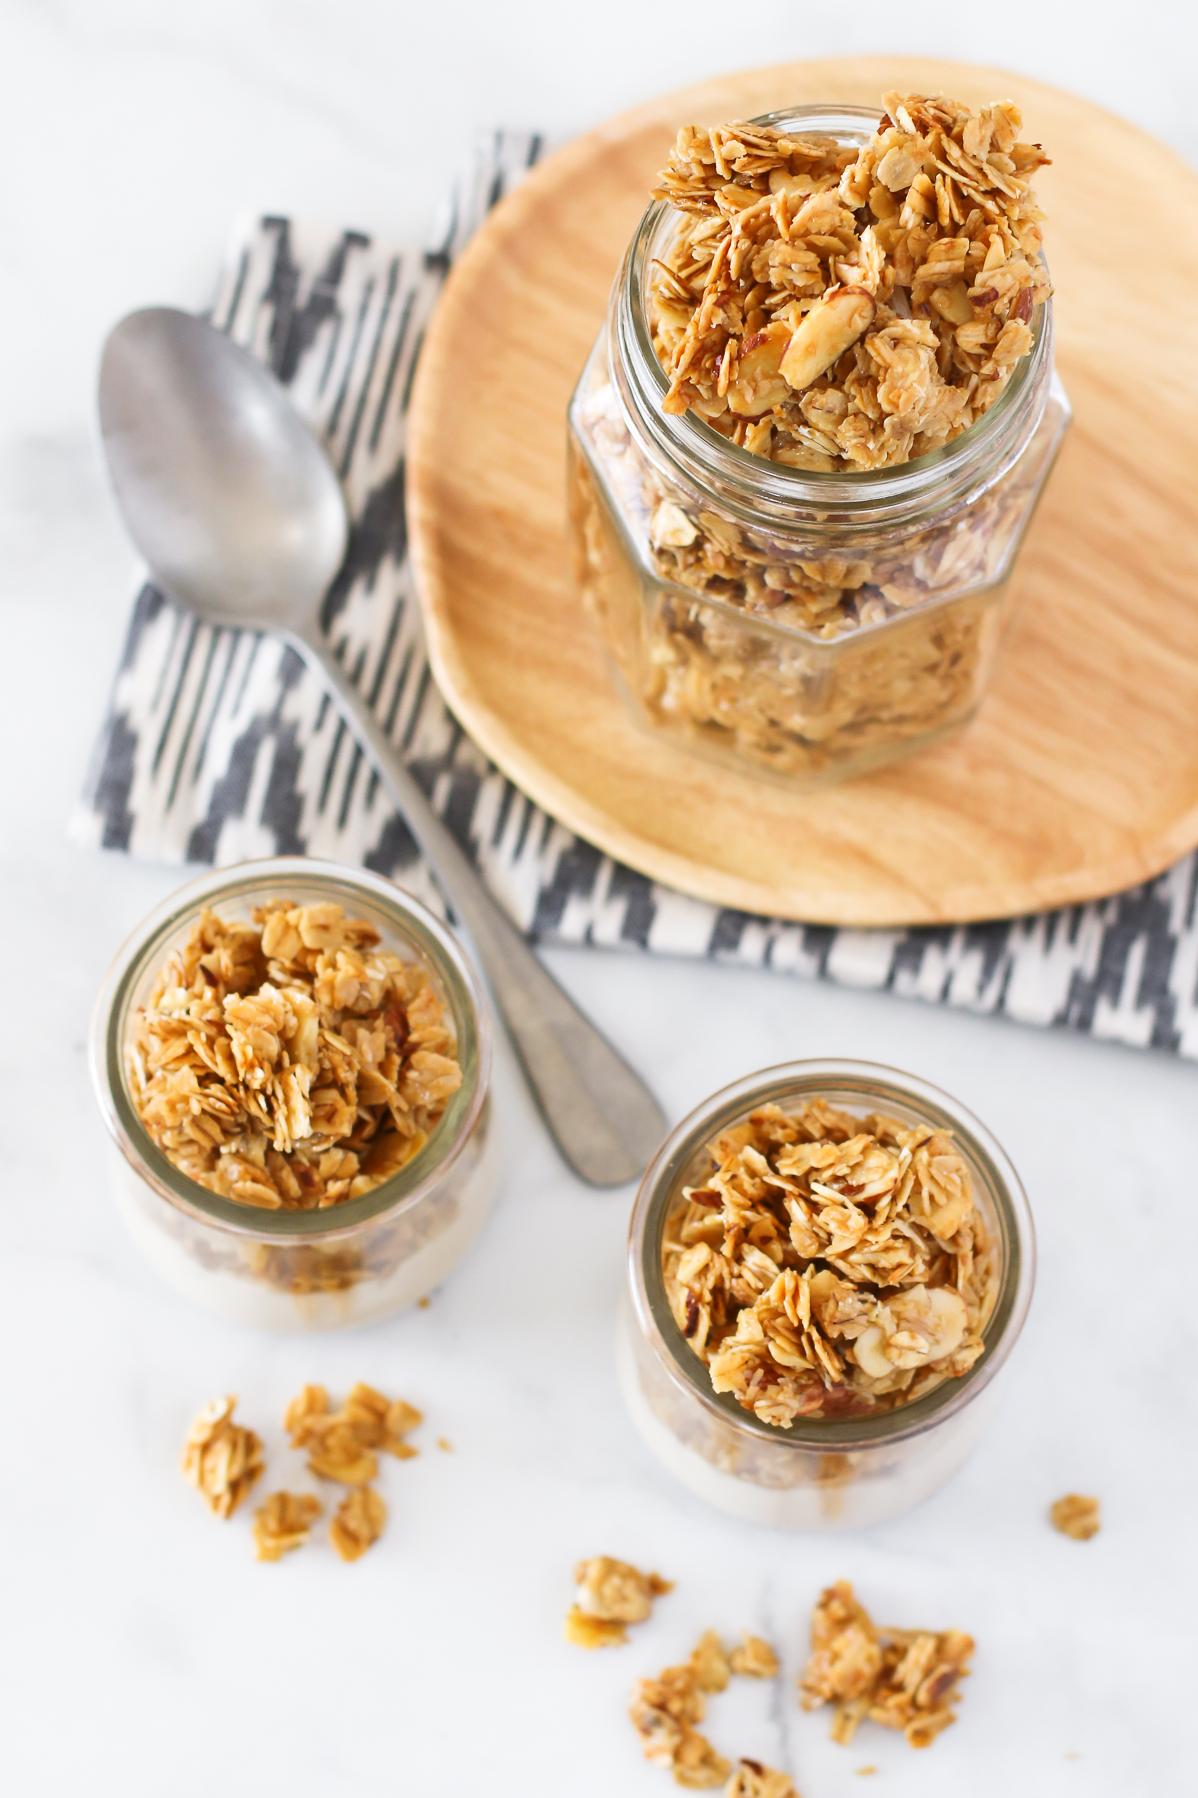  Wholesome, gluten-free, and bursting with natural sweetness - this granola has it all!